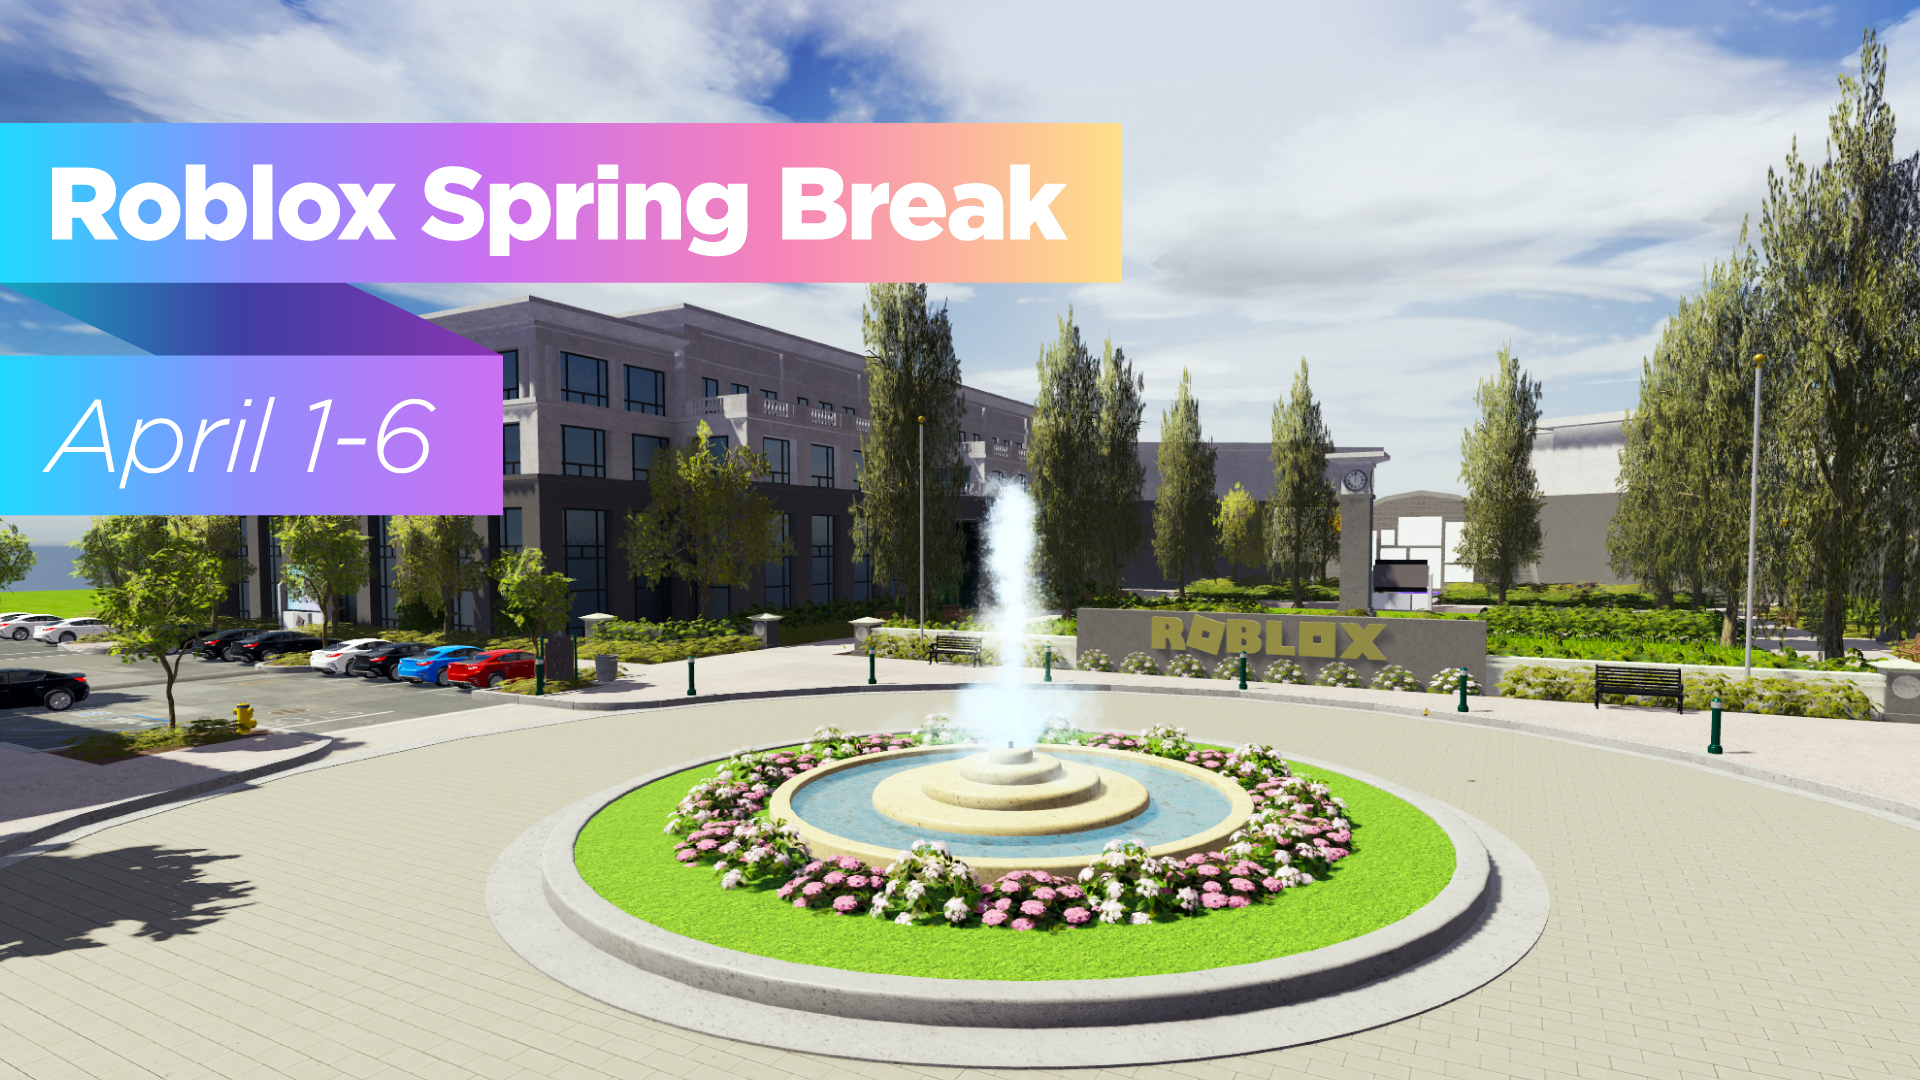 Why We Re Bringing Spring Break To Roblox Employees Roblox Blog - roblox ferris belluers day off